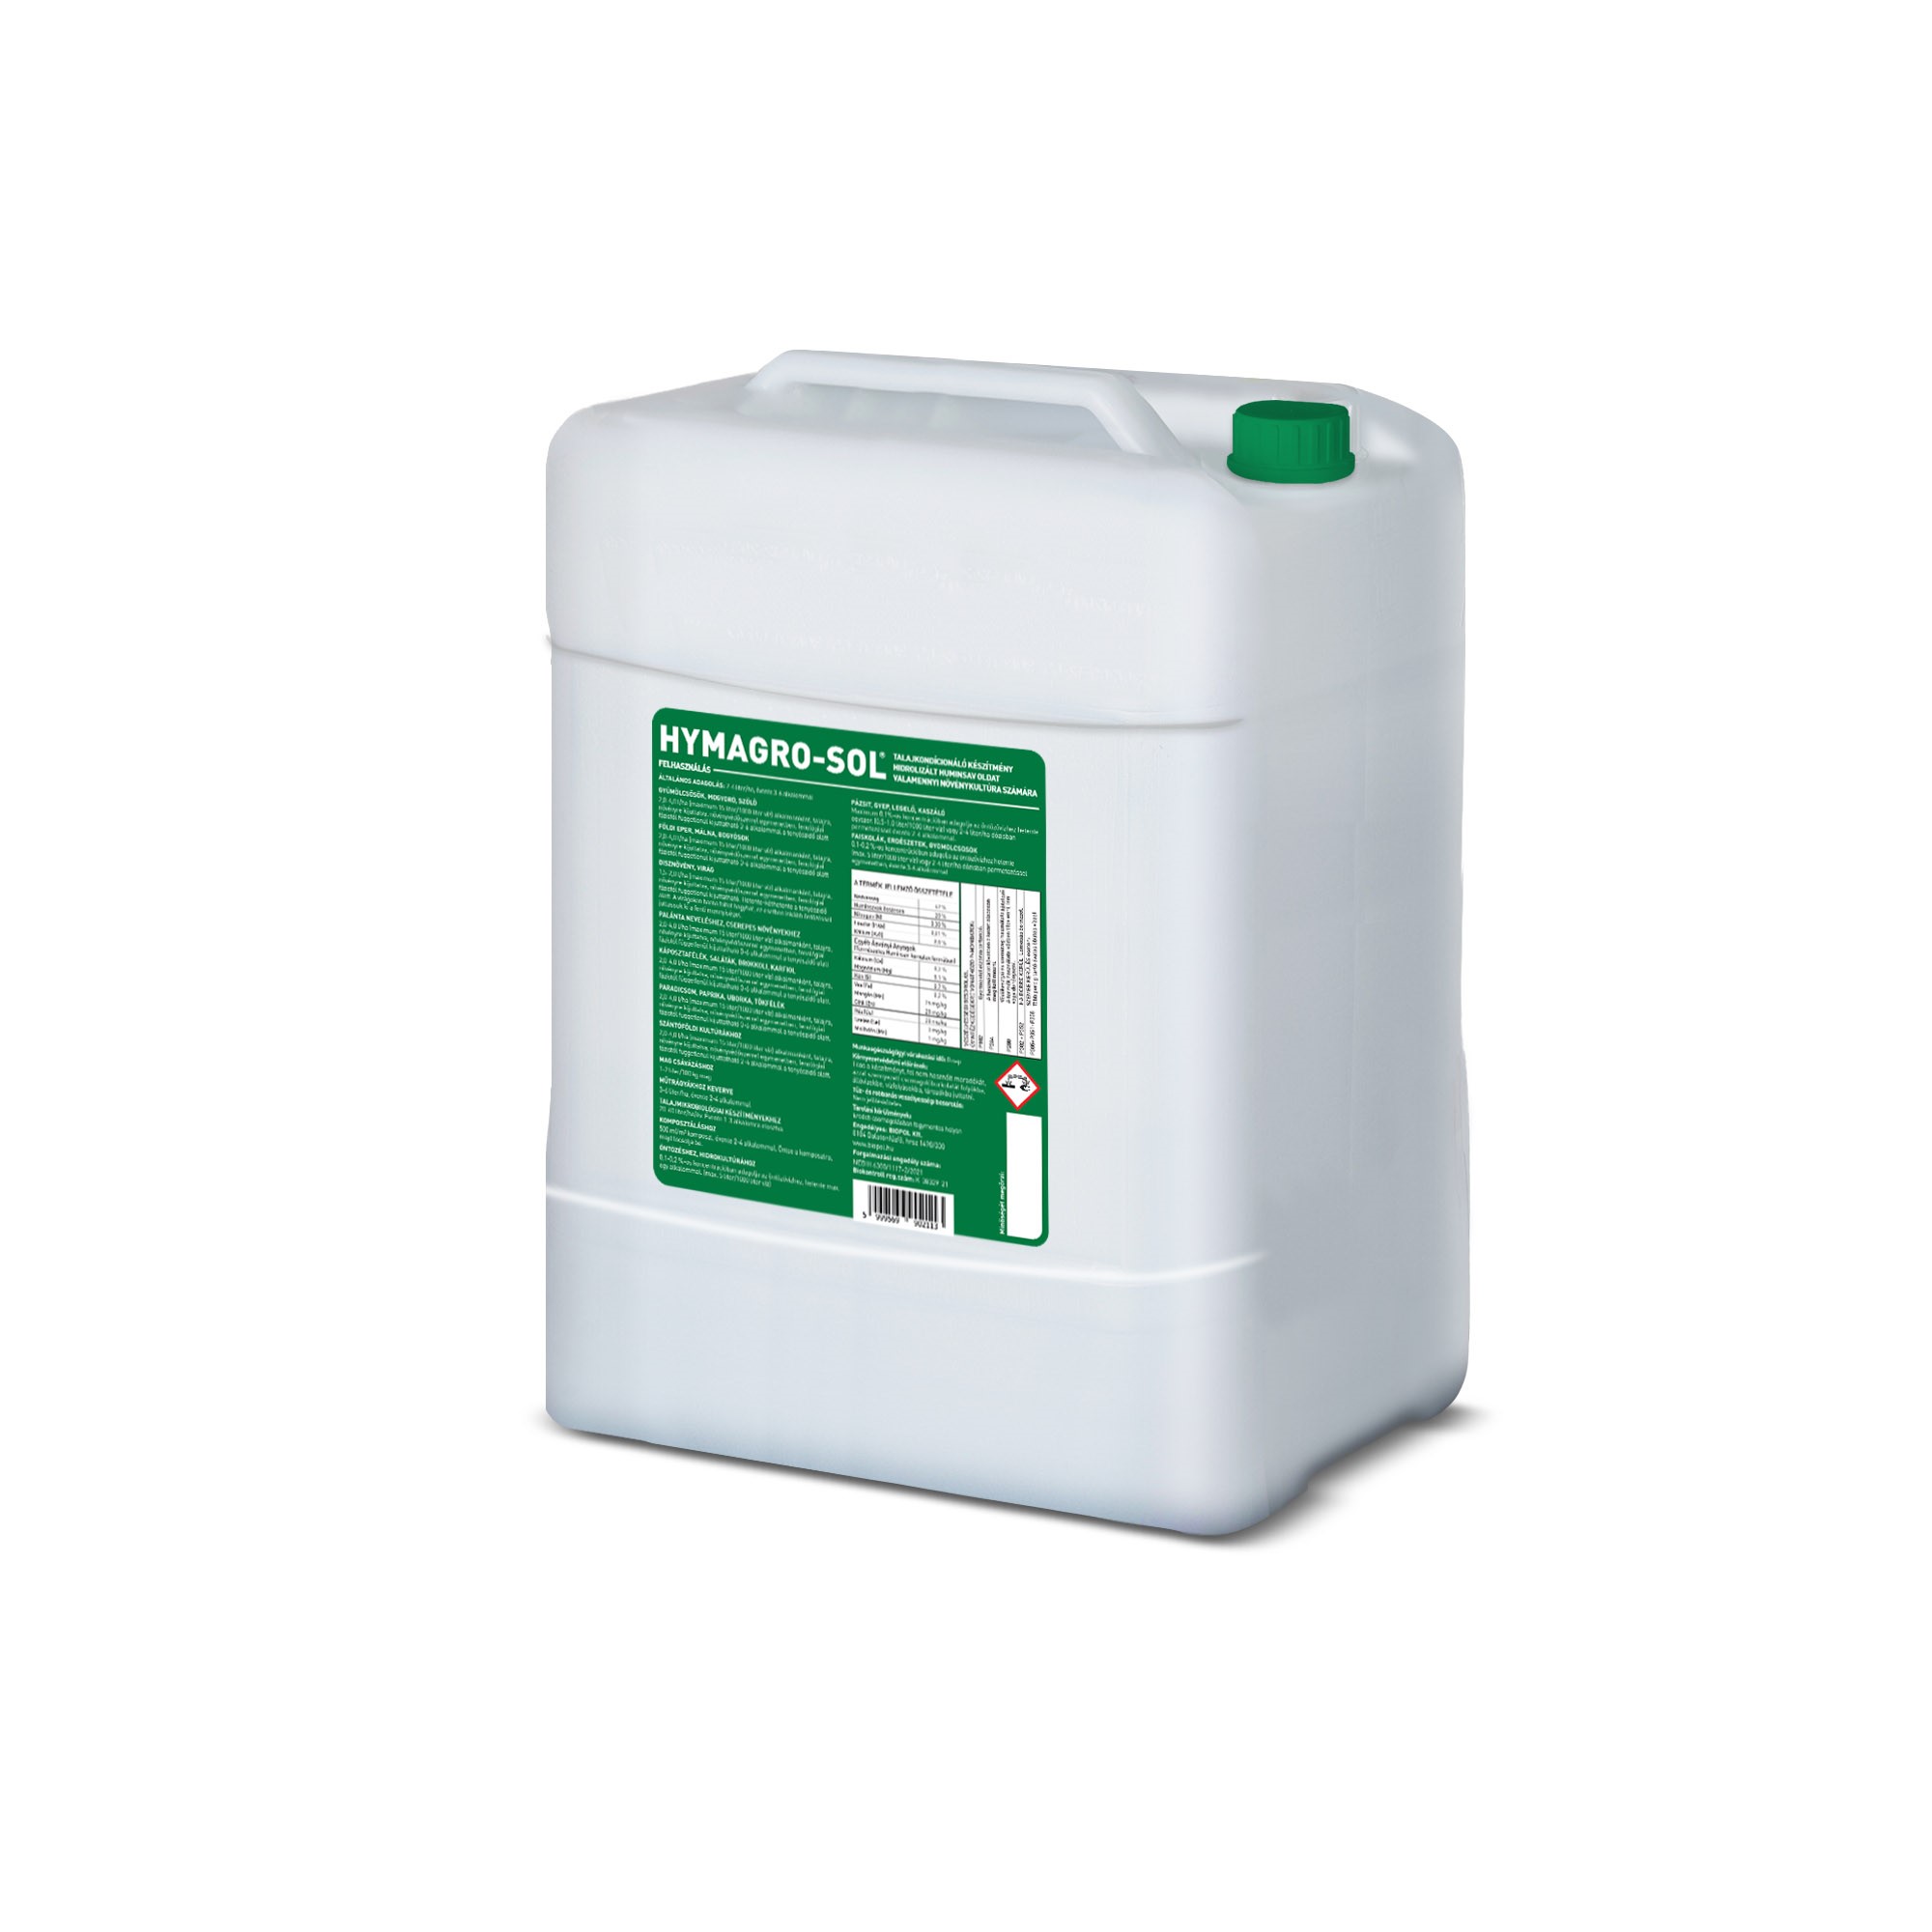 Hymagro-sol humic acid soil conditioner 20 l